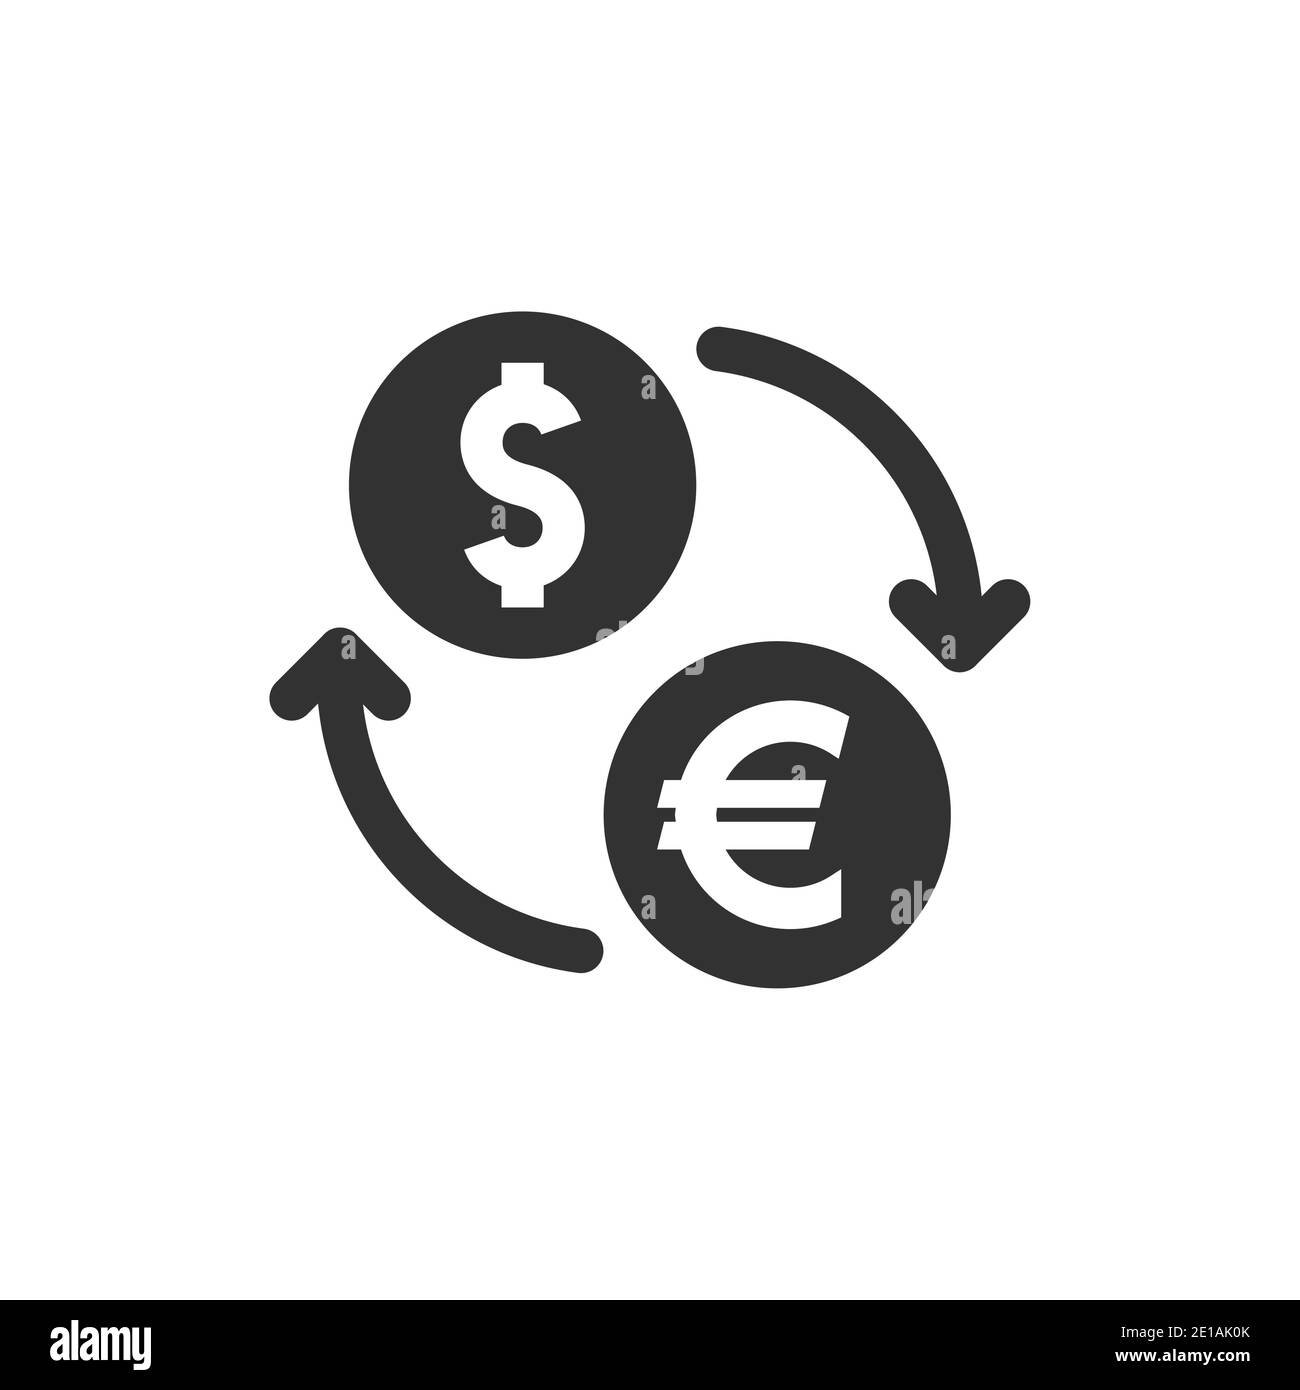 Euro and dollar exchange black vector icon. Money transfer currency coin with arrows symbol. Stock Vector